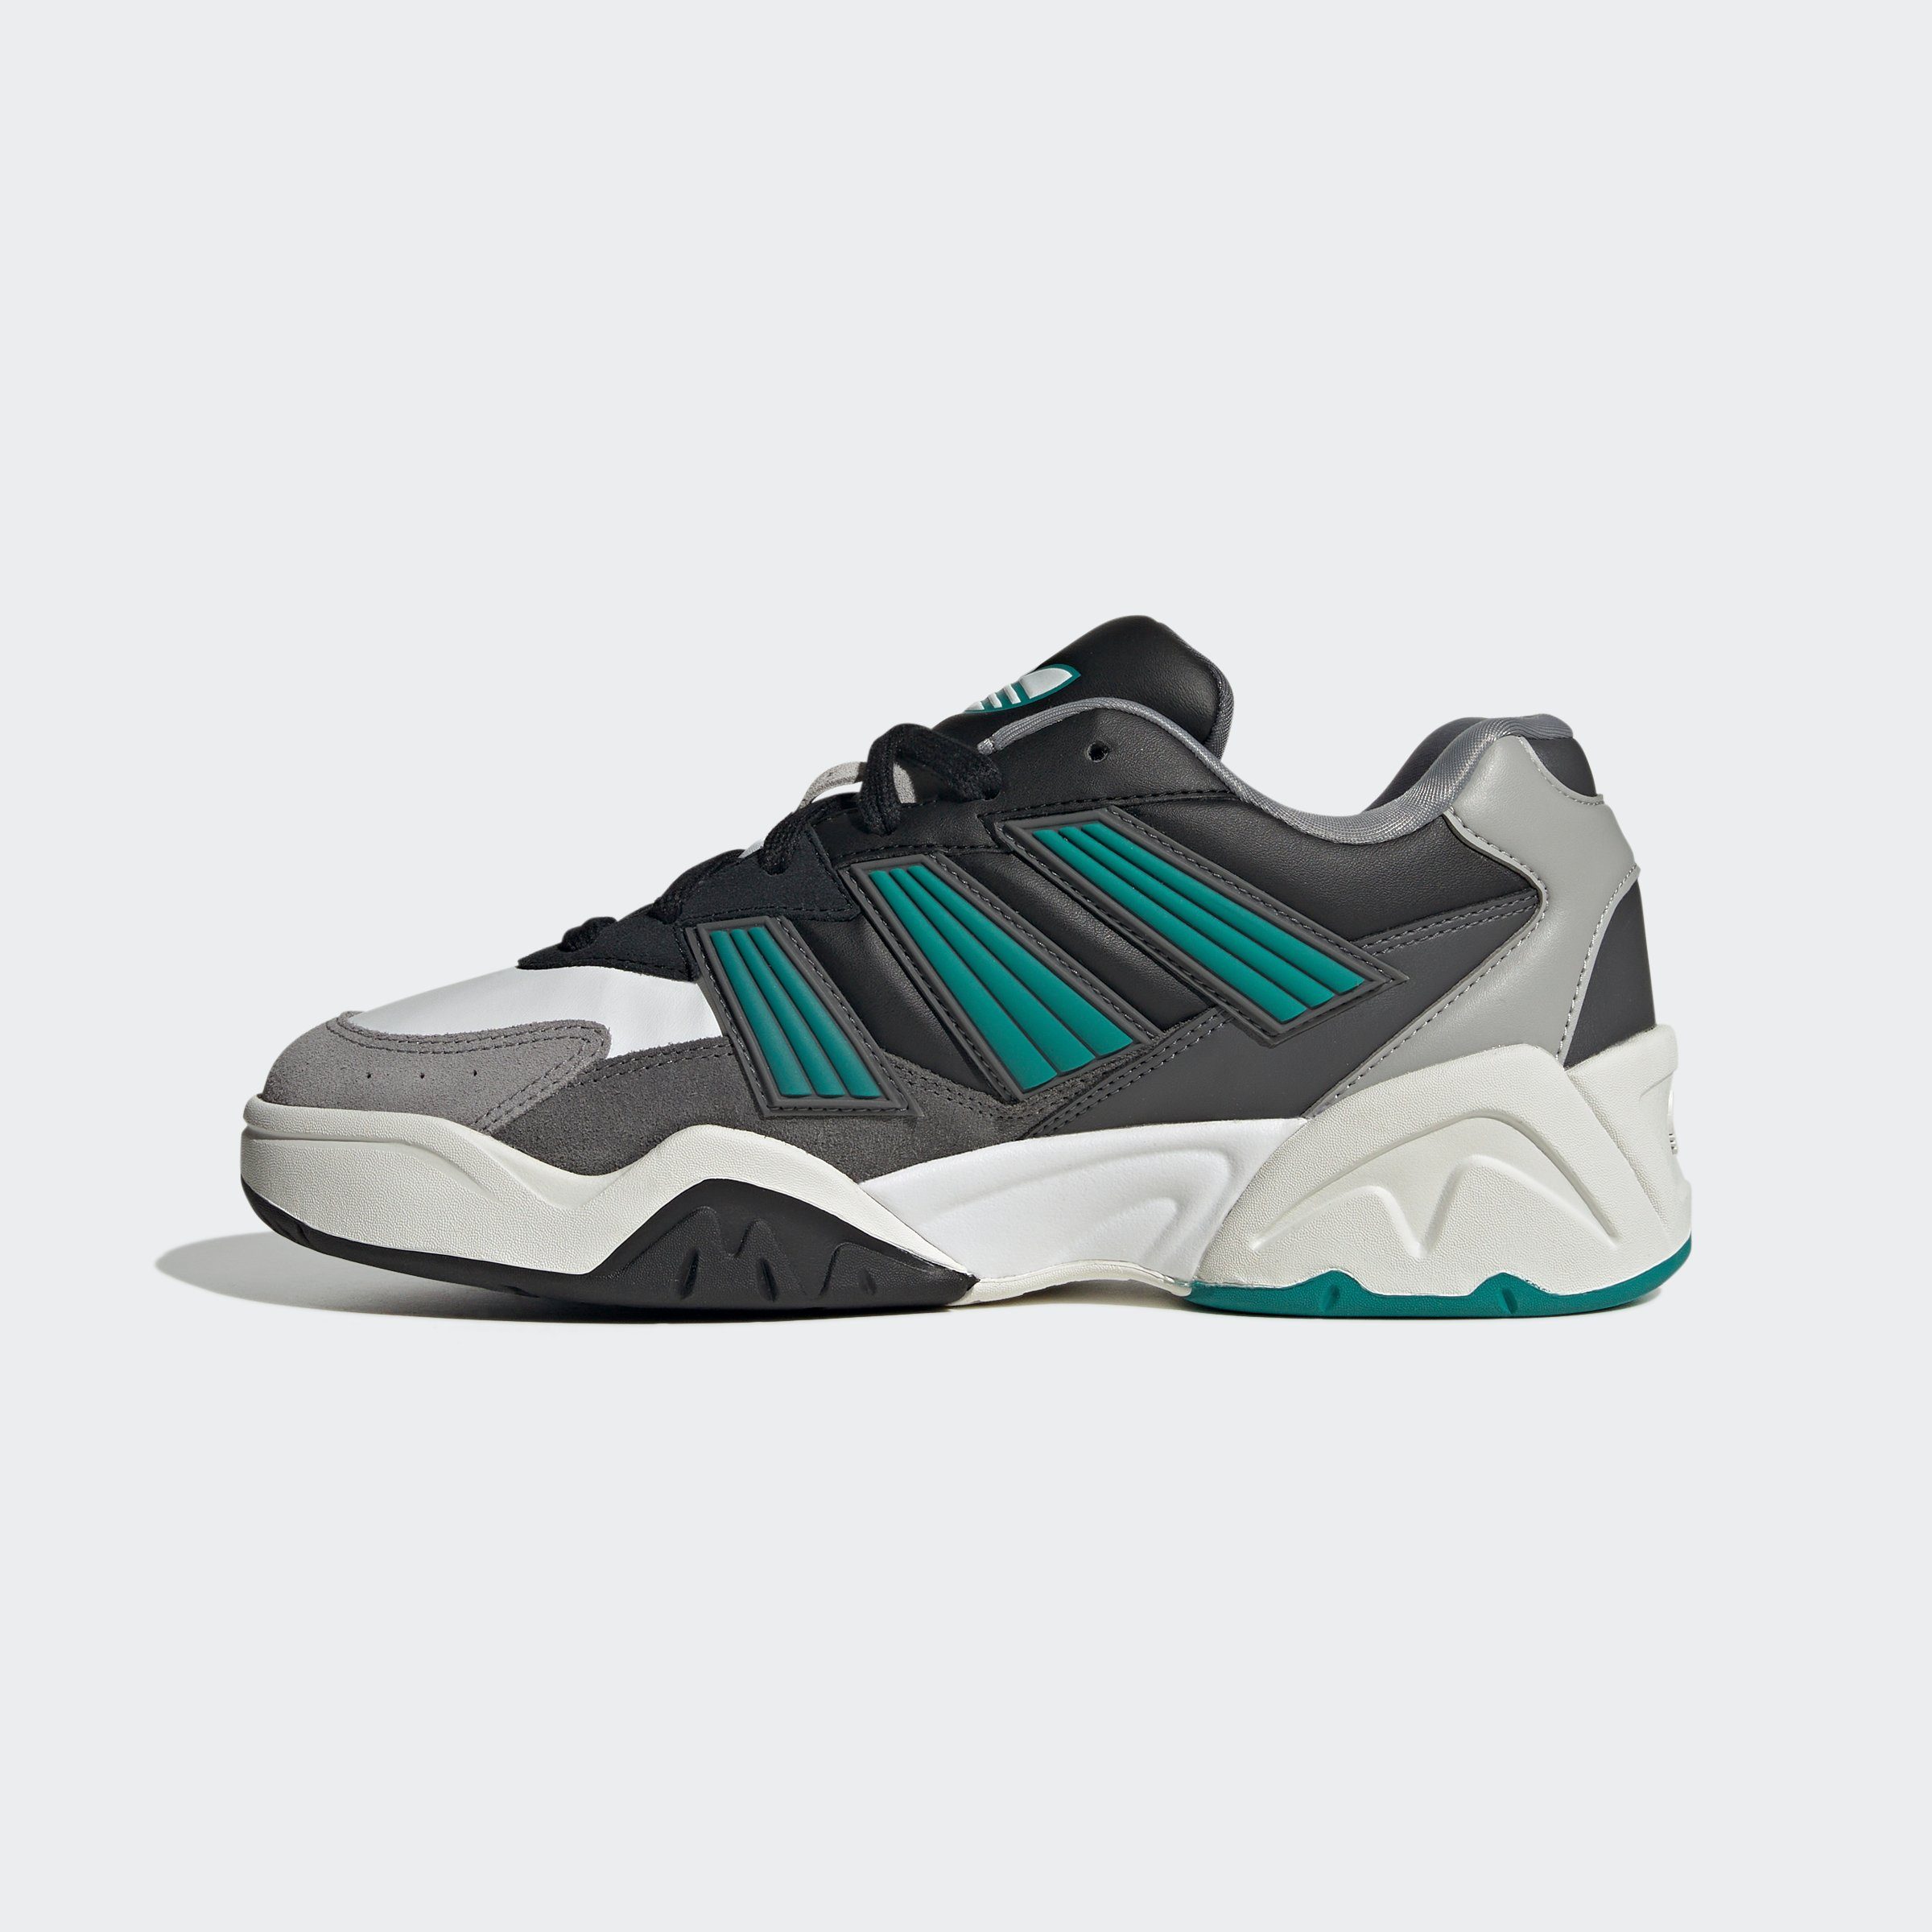 COURT adidas / White Originals MAGNETIC Sneaker Eqt Cloud White / Green Crystal